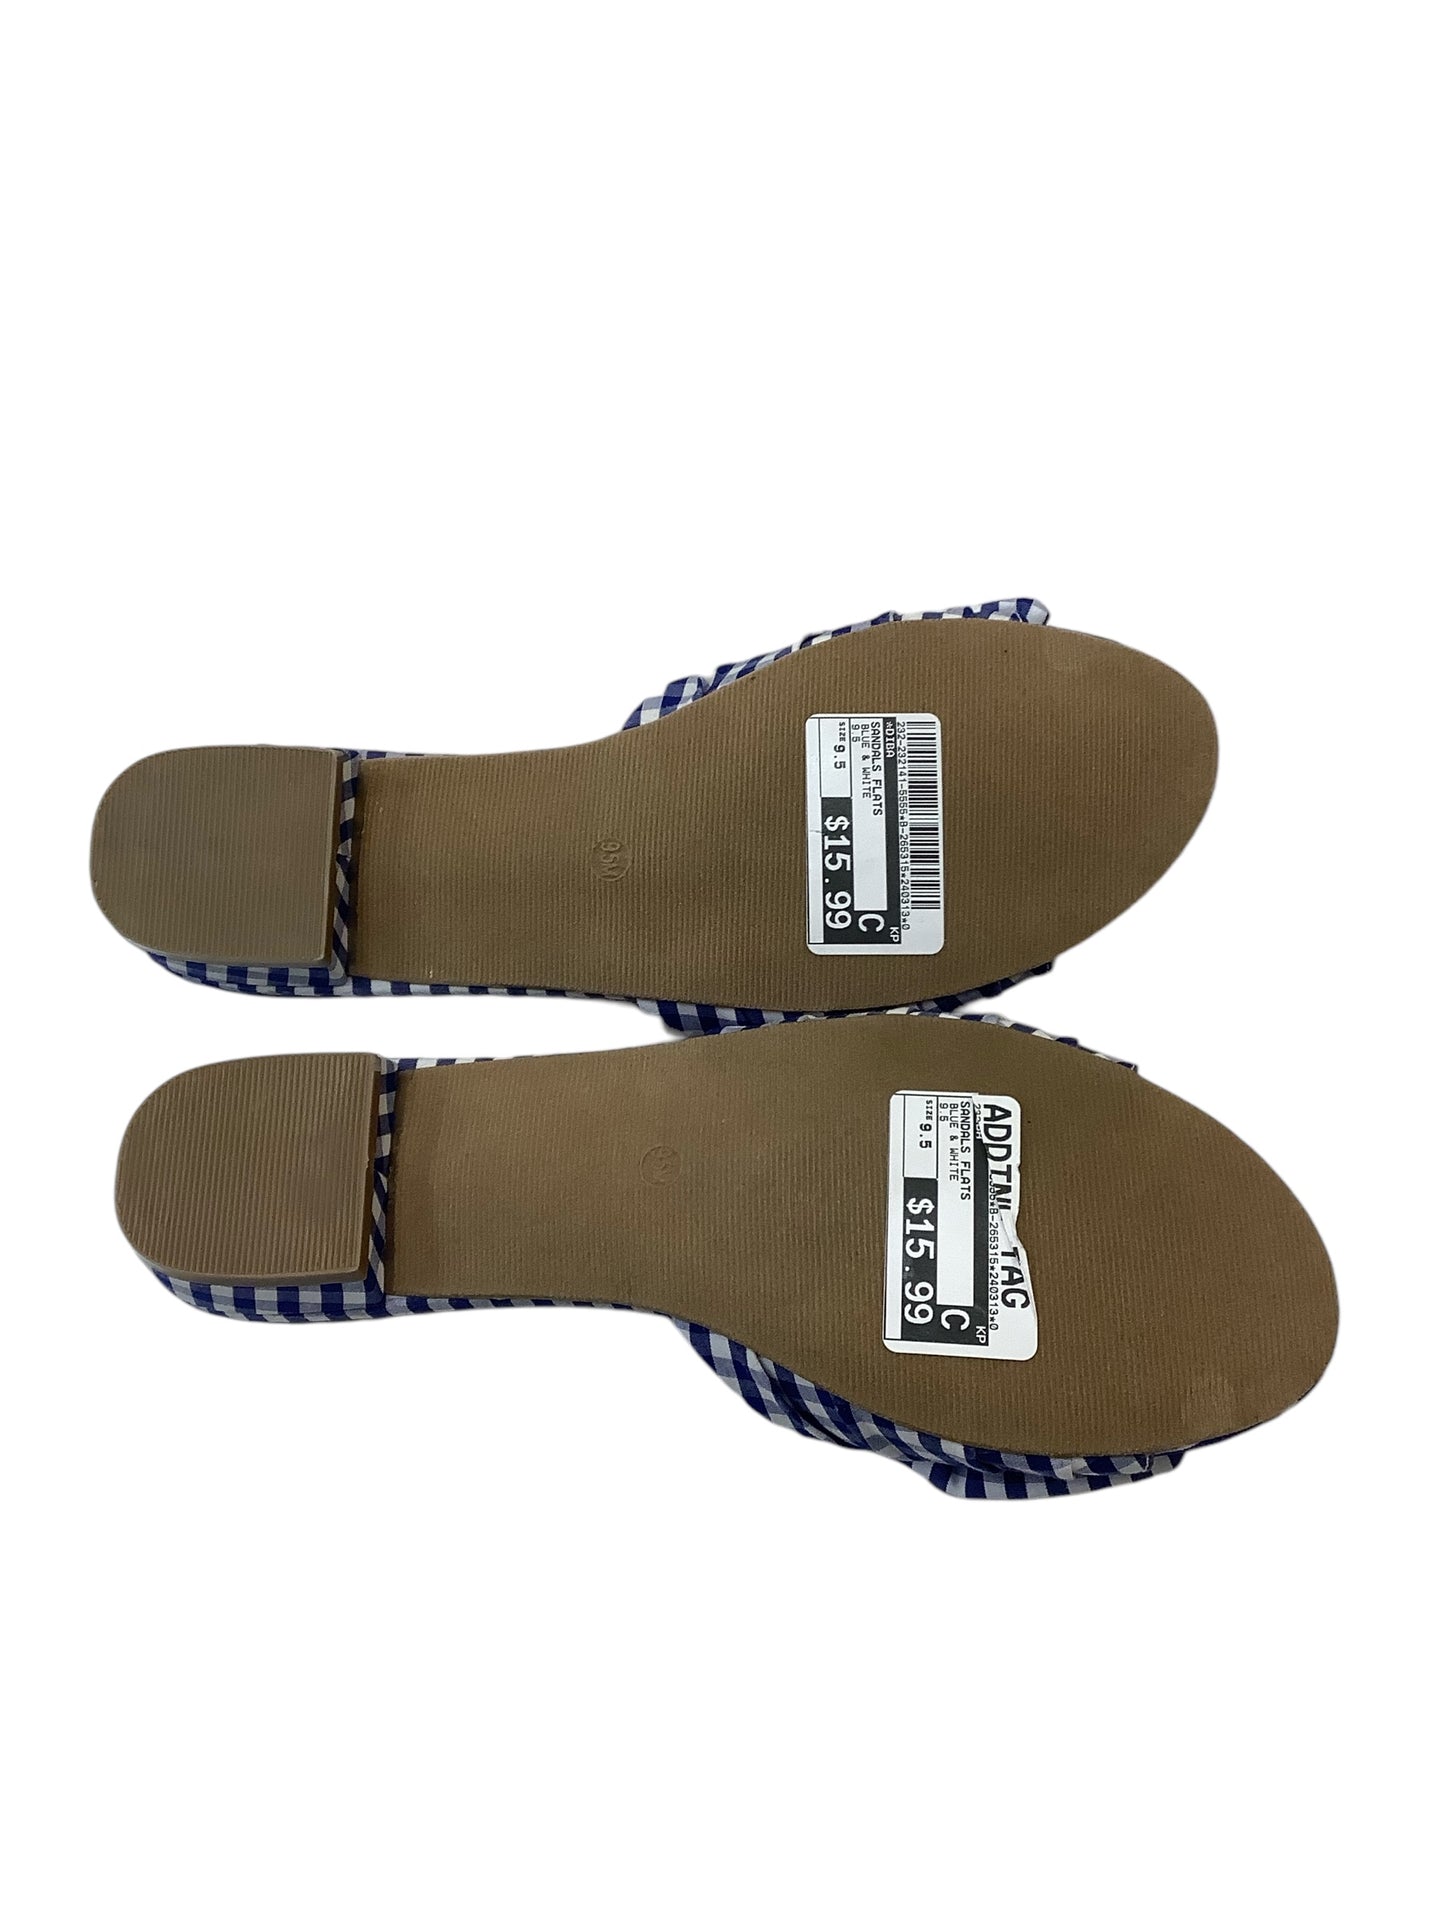 Sandals Flats By Diba  Size: 9.5